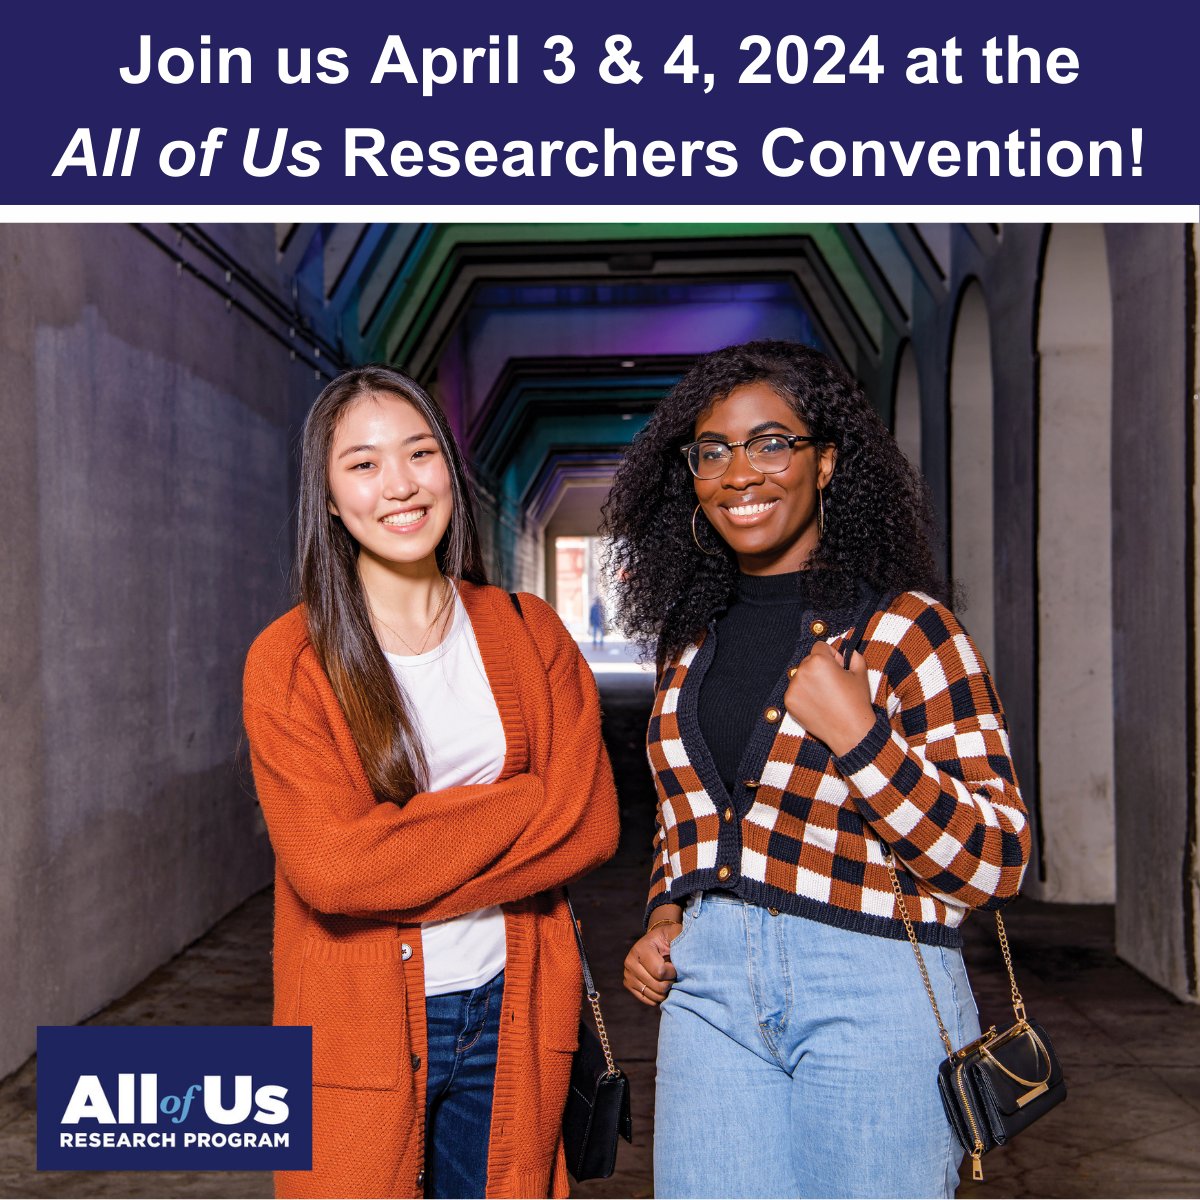 Join us on April 3 & 4 for the free, virtual @AllofUsResearch Convention to learn how researchers using All of Us data! Register today: researchallofus.org/convention #AllofUsRC2024